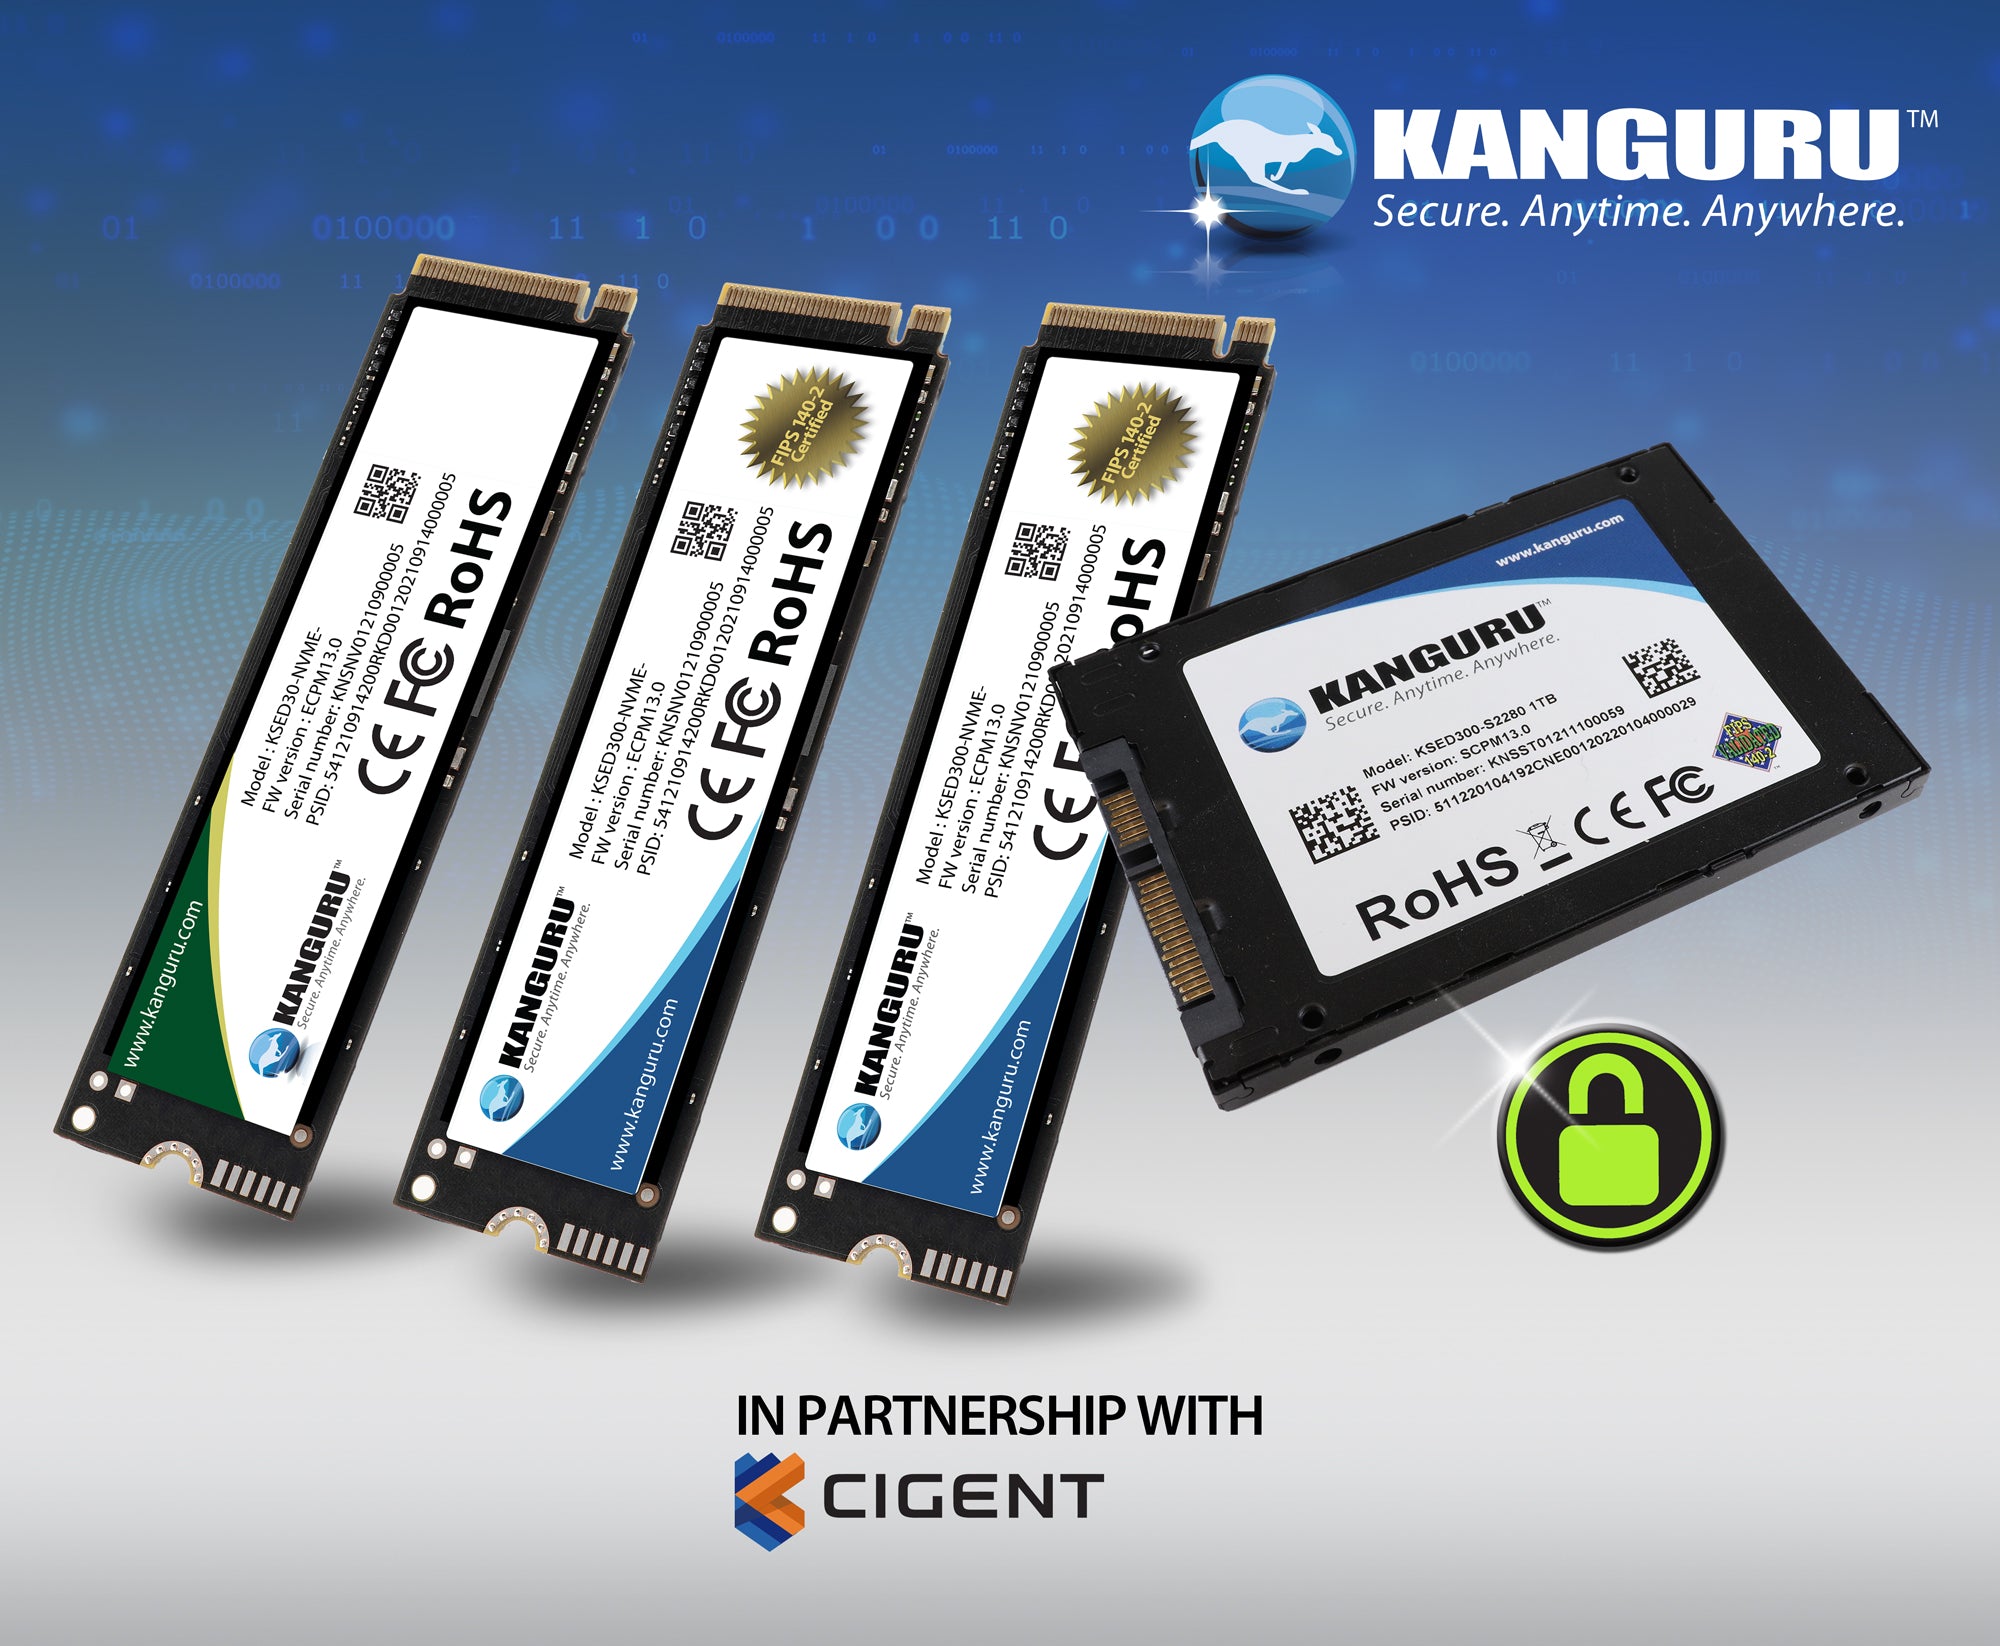 Kanguru introduces an exceptional new line of Hardware-Based, Self-Encrypting Drives designed to help organizations secure their data on laptops and tablets. 